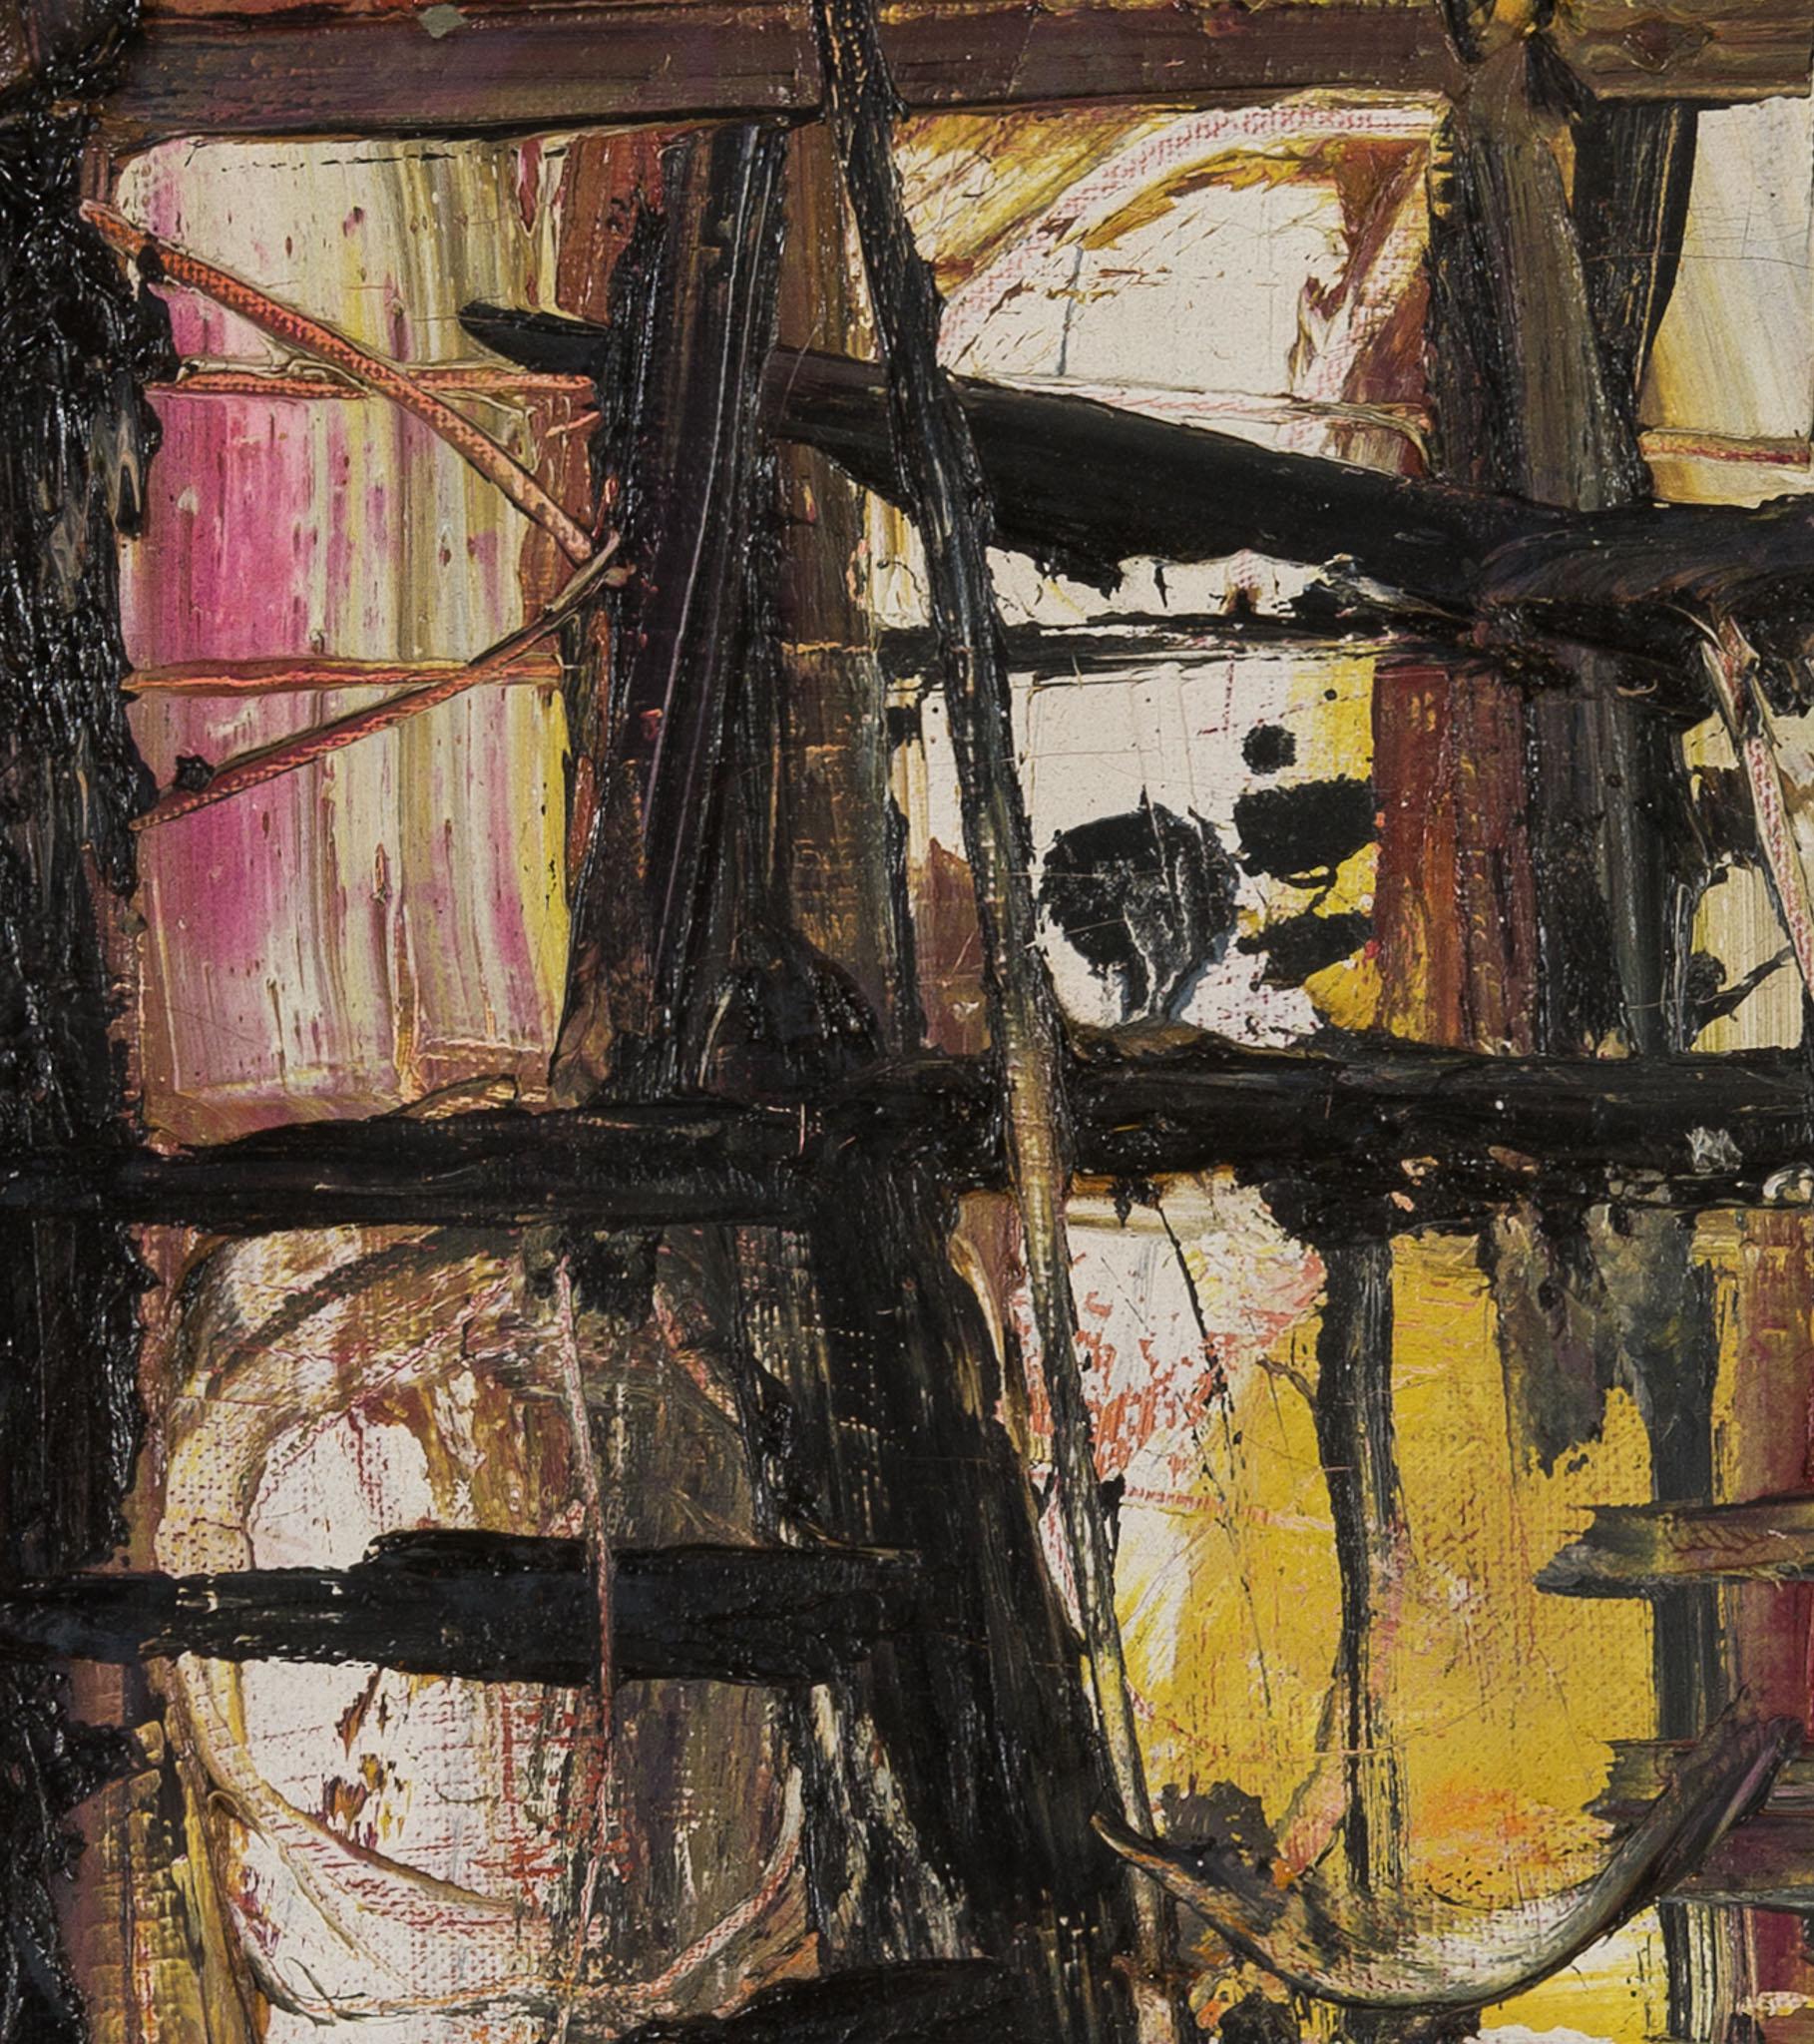 detail of an abstract painting with chaotic brushmarks in black, brown, and yellow